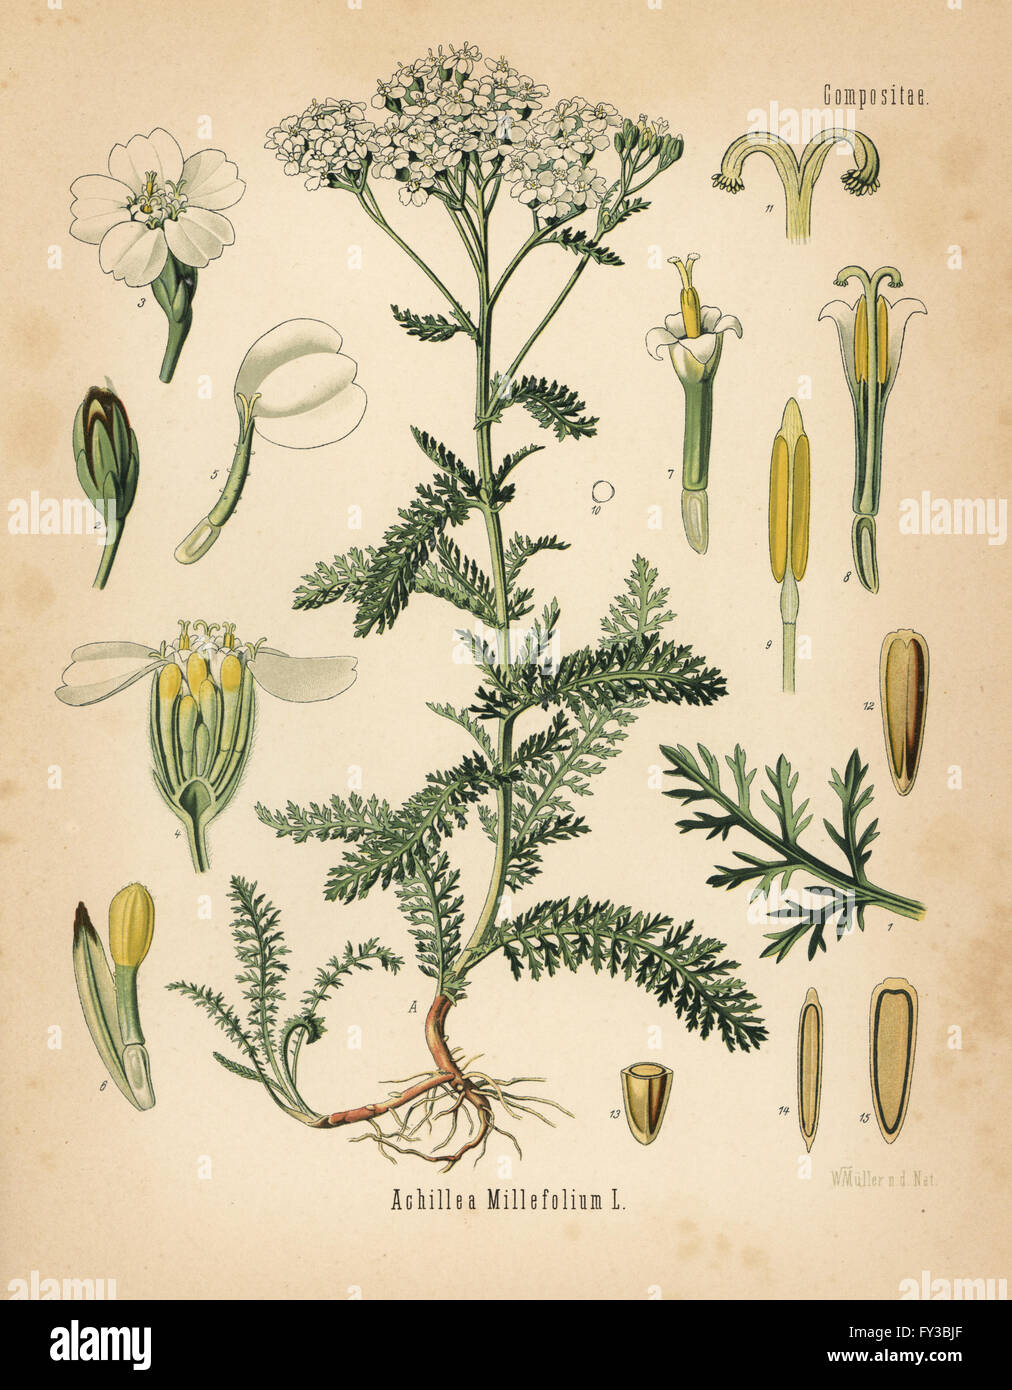 Yarrow, Achillea millefolium. Chromolithograph after a botanical illustration by Walther Muller from Hermann Adolph Koehler's Medicinal Plants, edited by Gustav Pabst, Koehler, Germany, 1887. Stock Photo